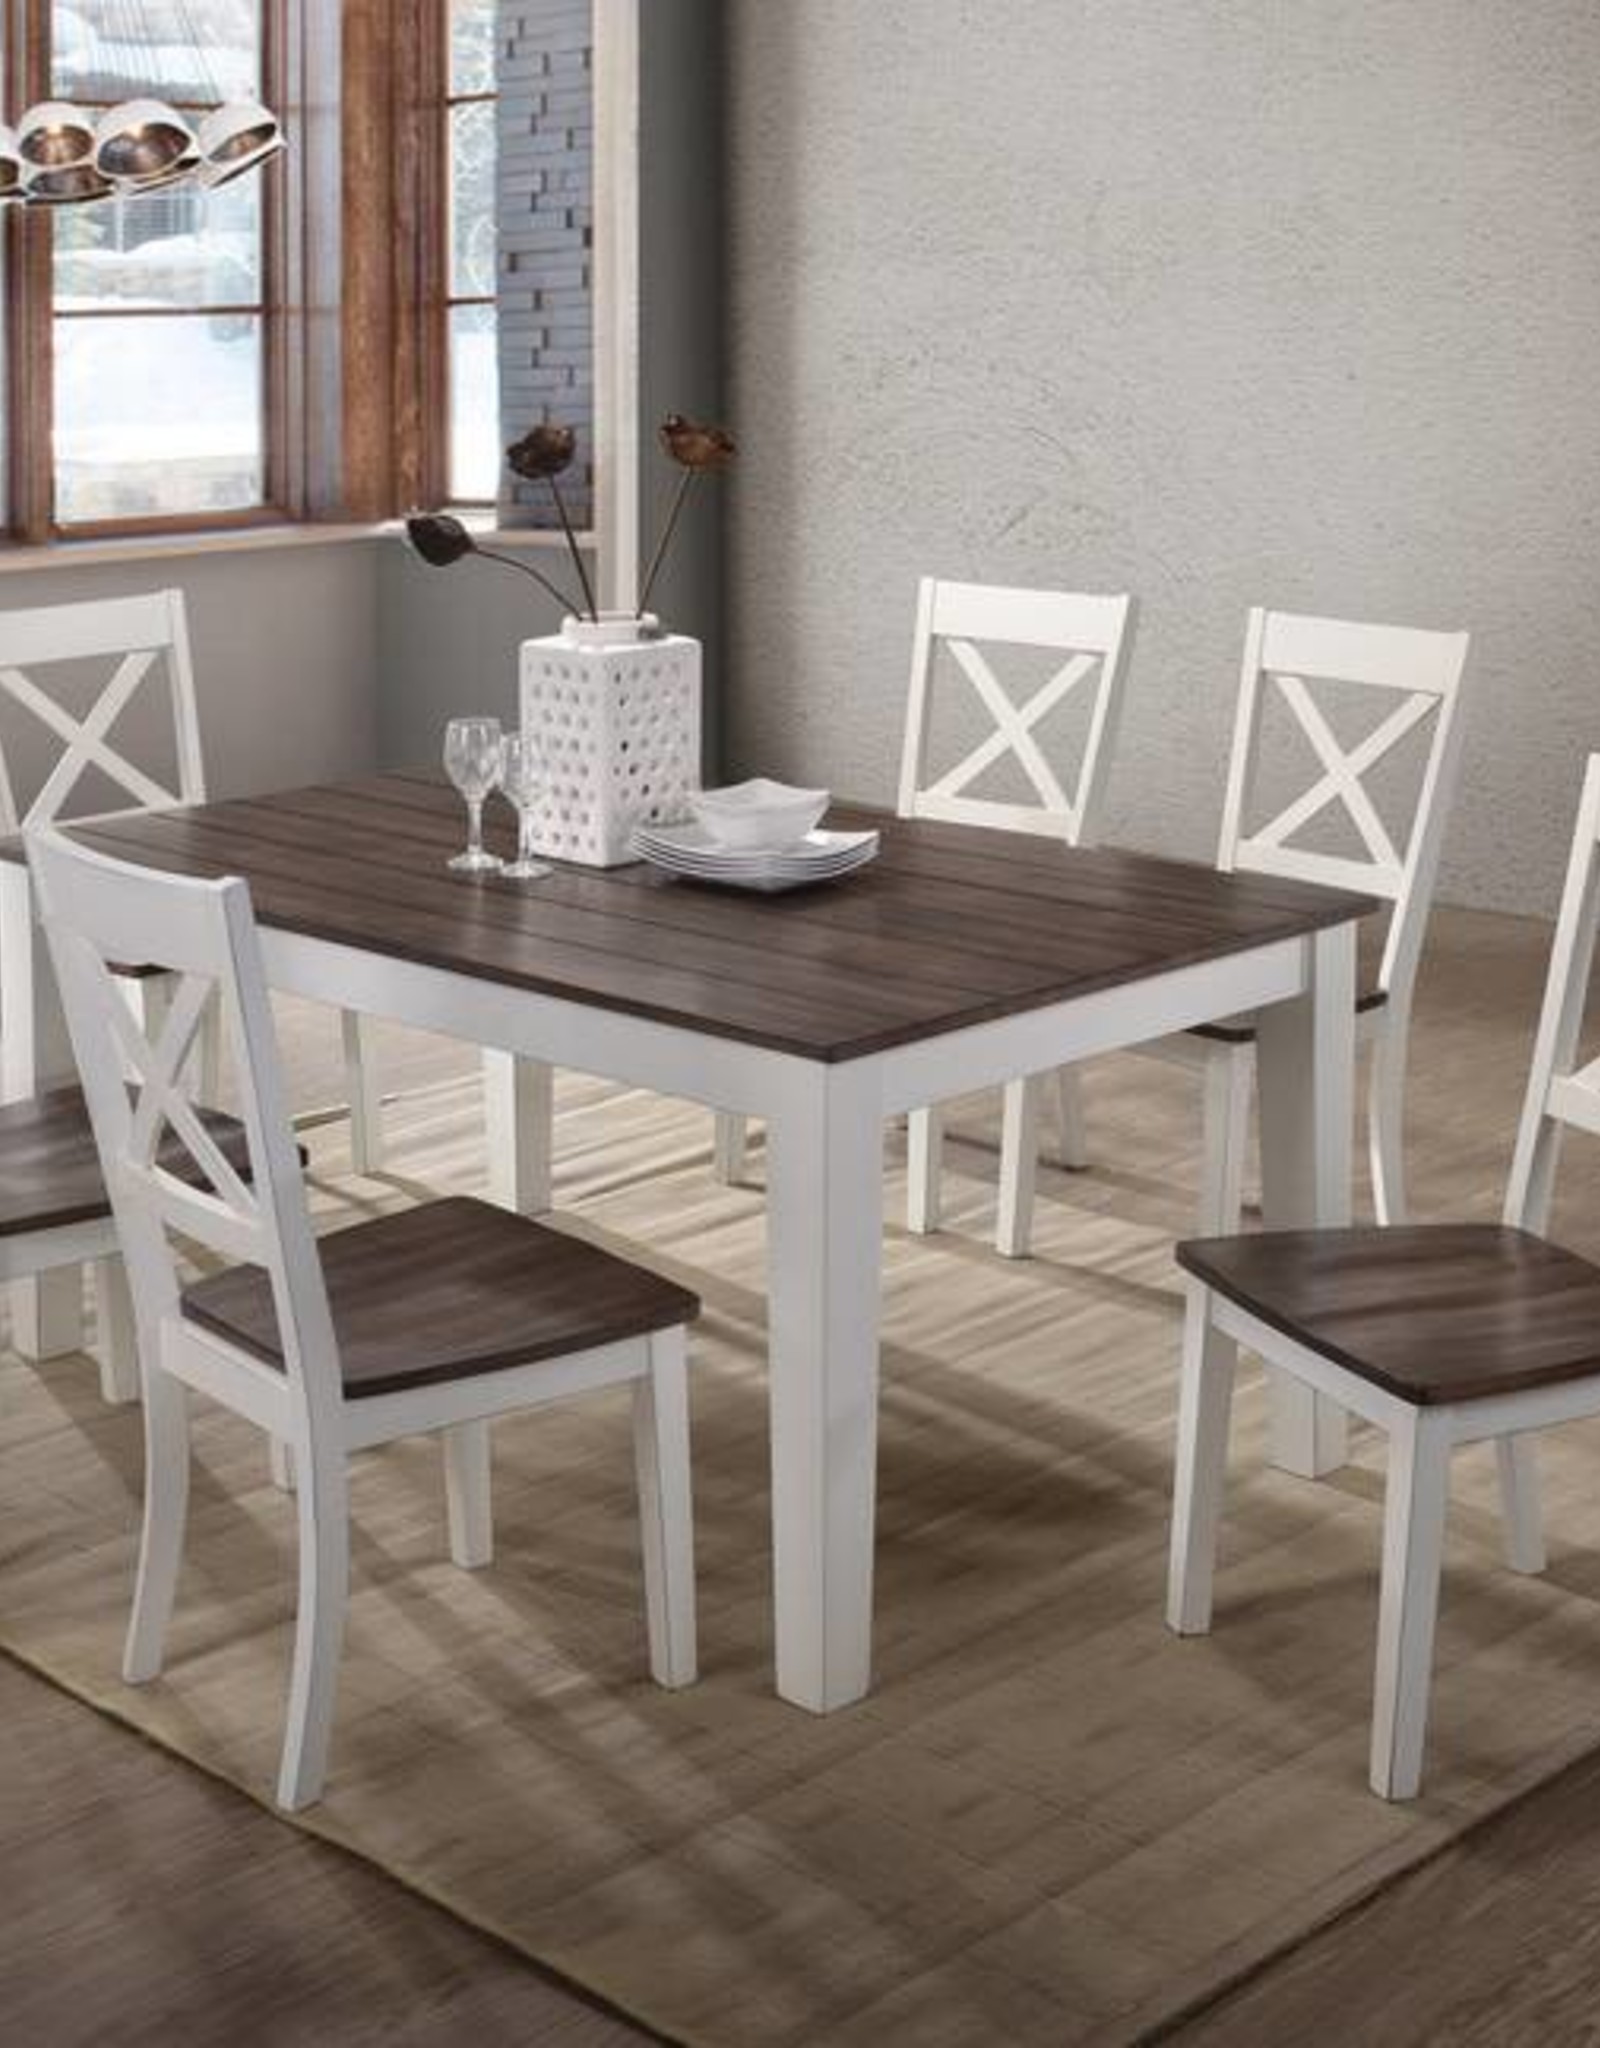 A La Carte Rectangular Farmhouse Dining, How Big Of A Round Table For 6 Chairs